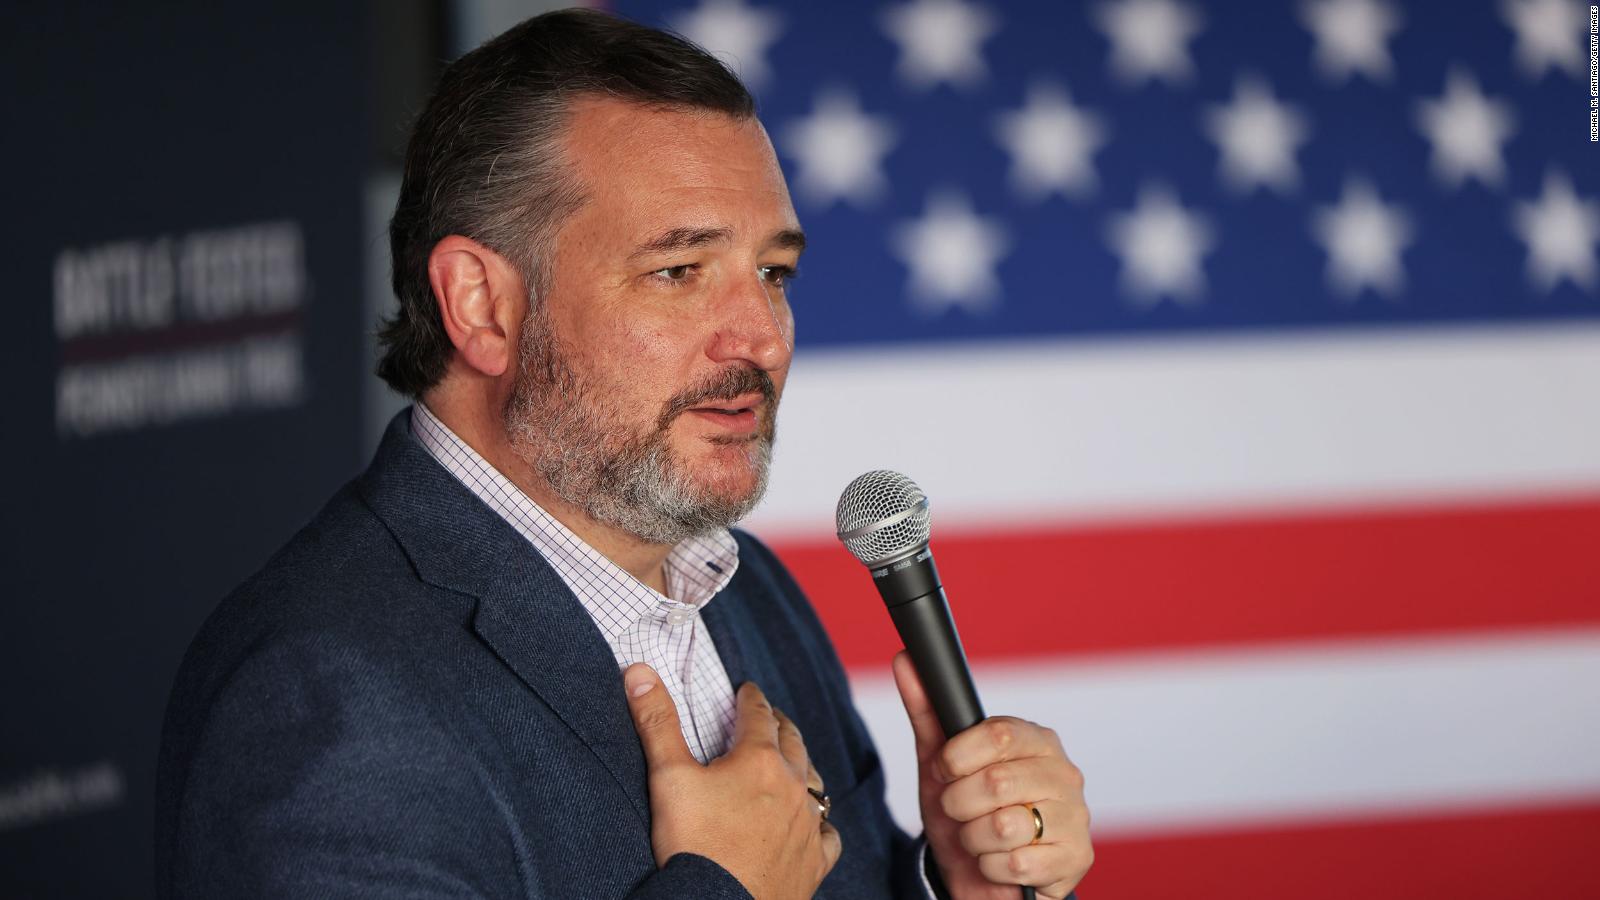 Ted Cruz Says Supreme Court Was ‘Clearly Wrong’ for Legalizing Same-sex Marriage in 2015 Ruling